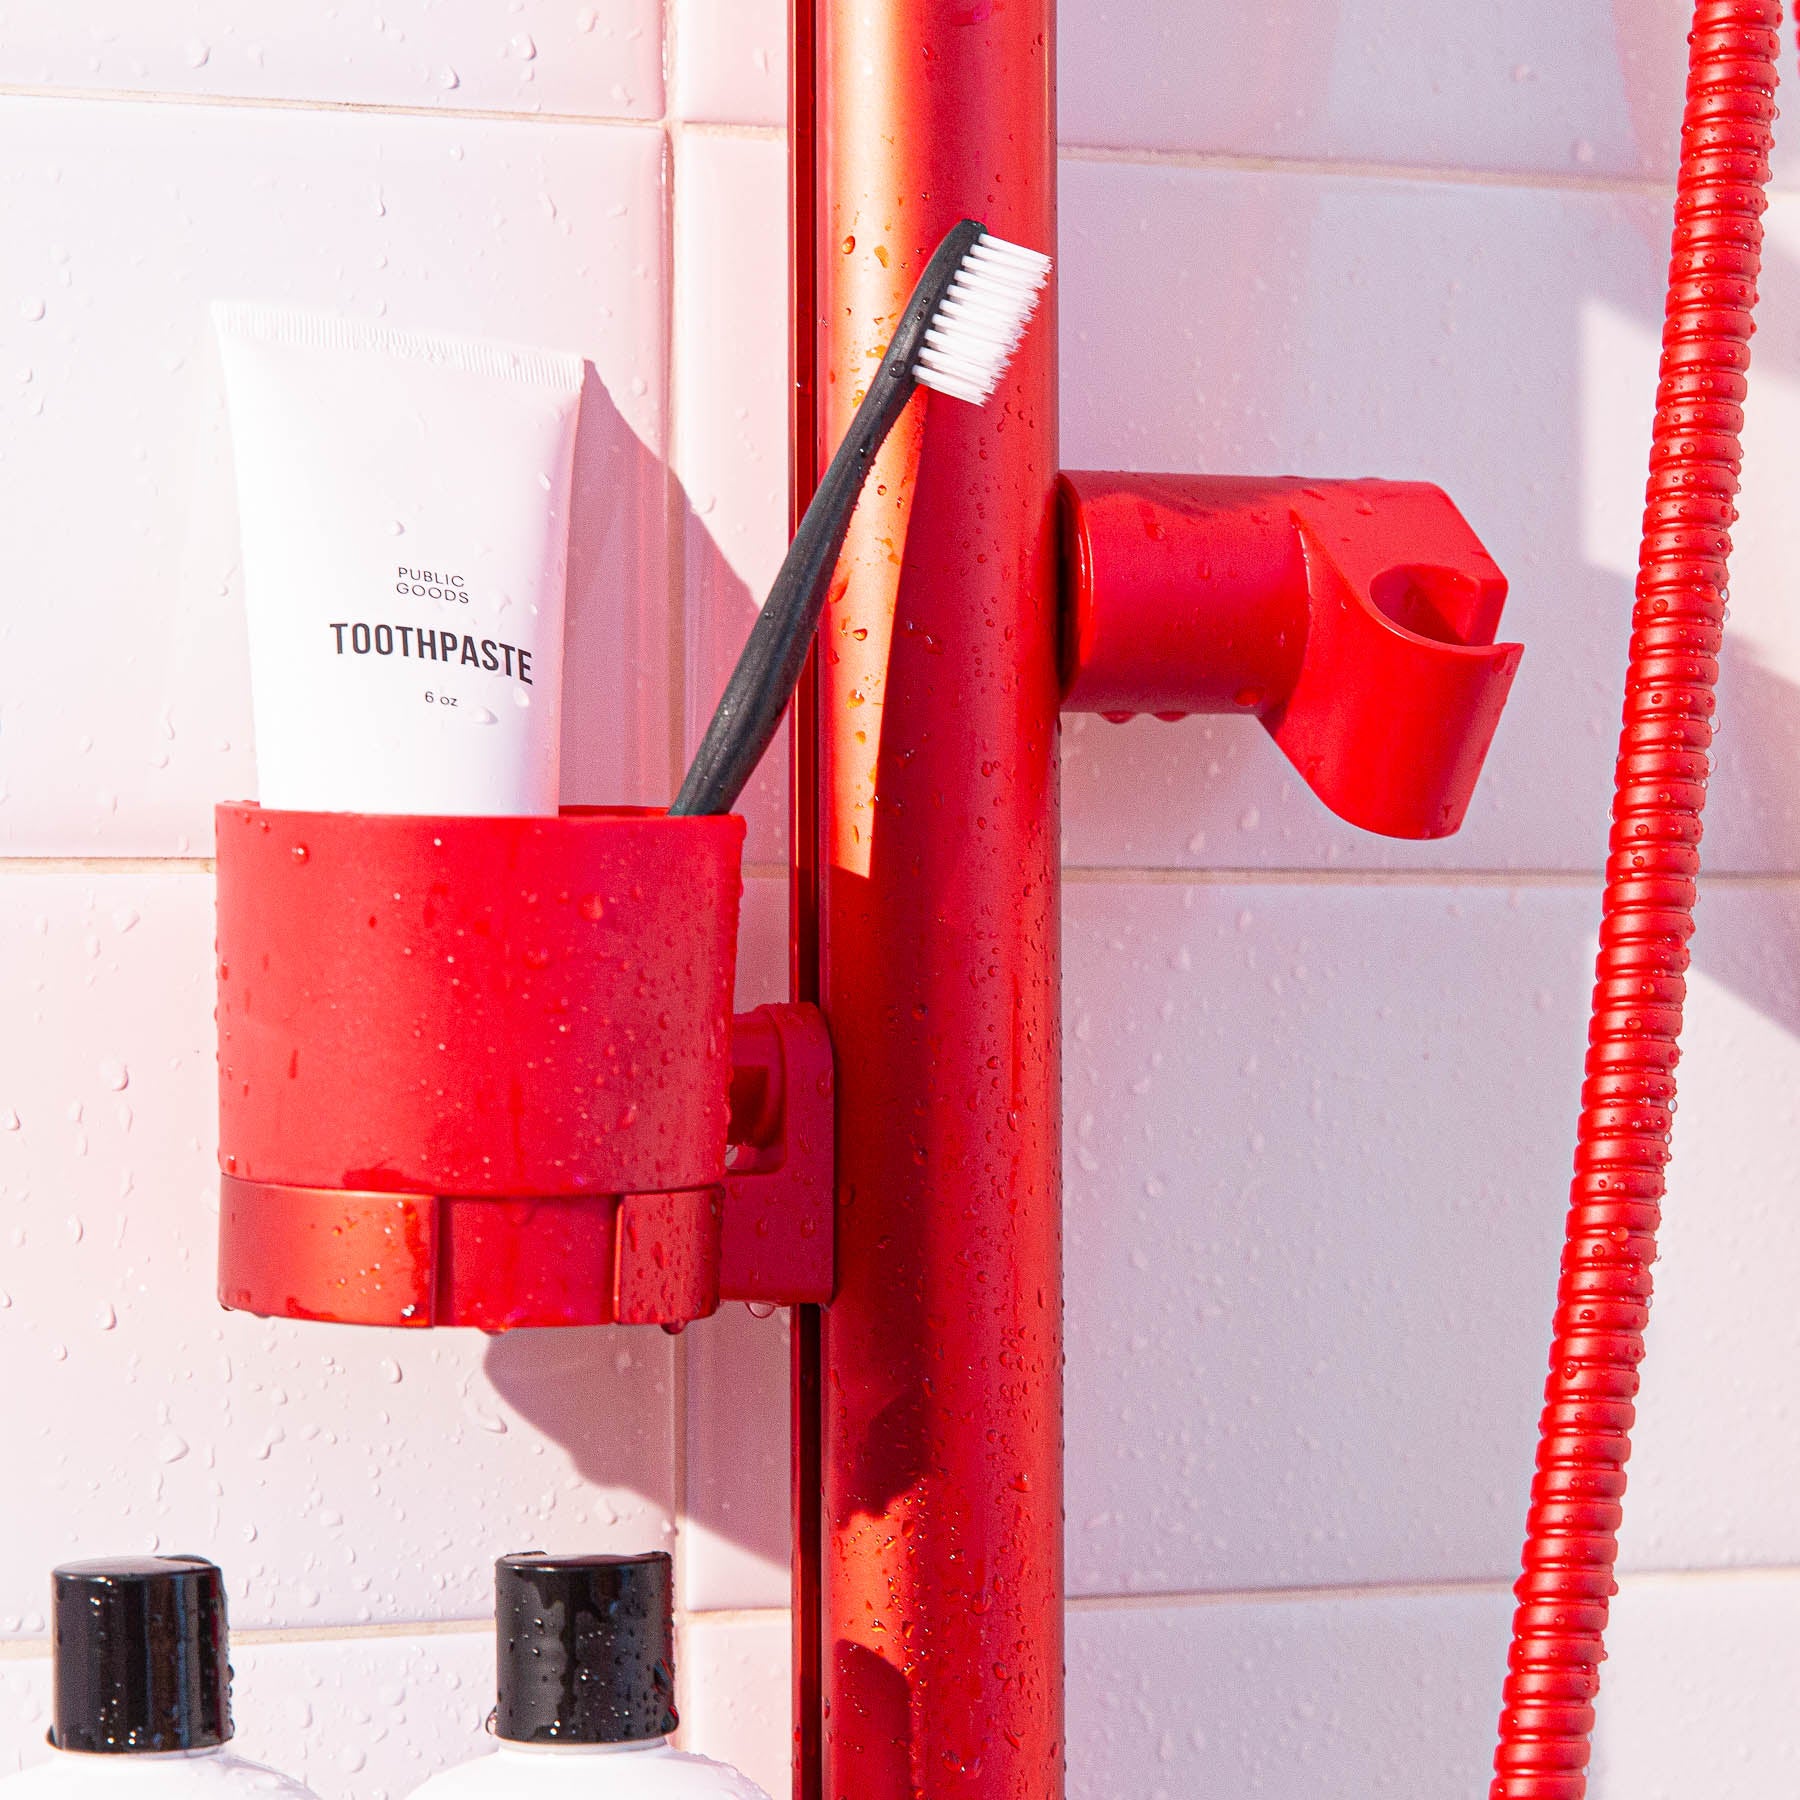 The sproos! shower uses a combination of ABS plastic and anodized aluminum to bring some color to your shower.